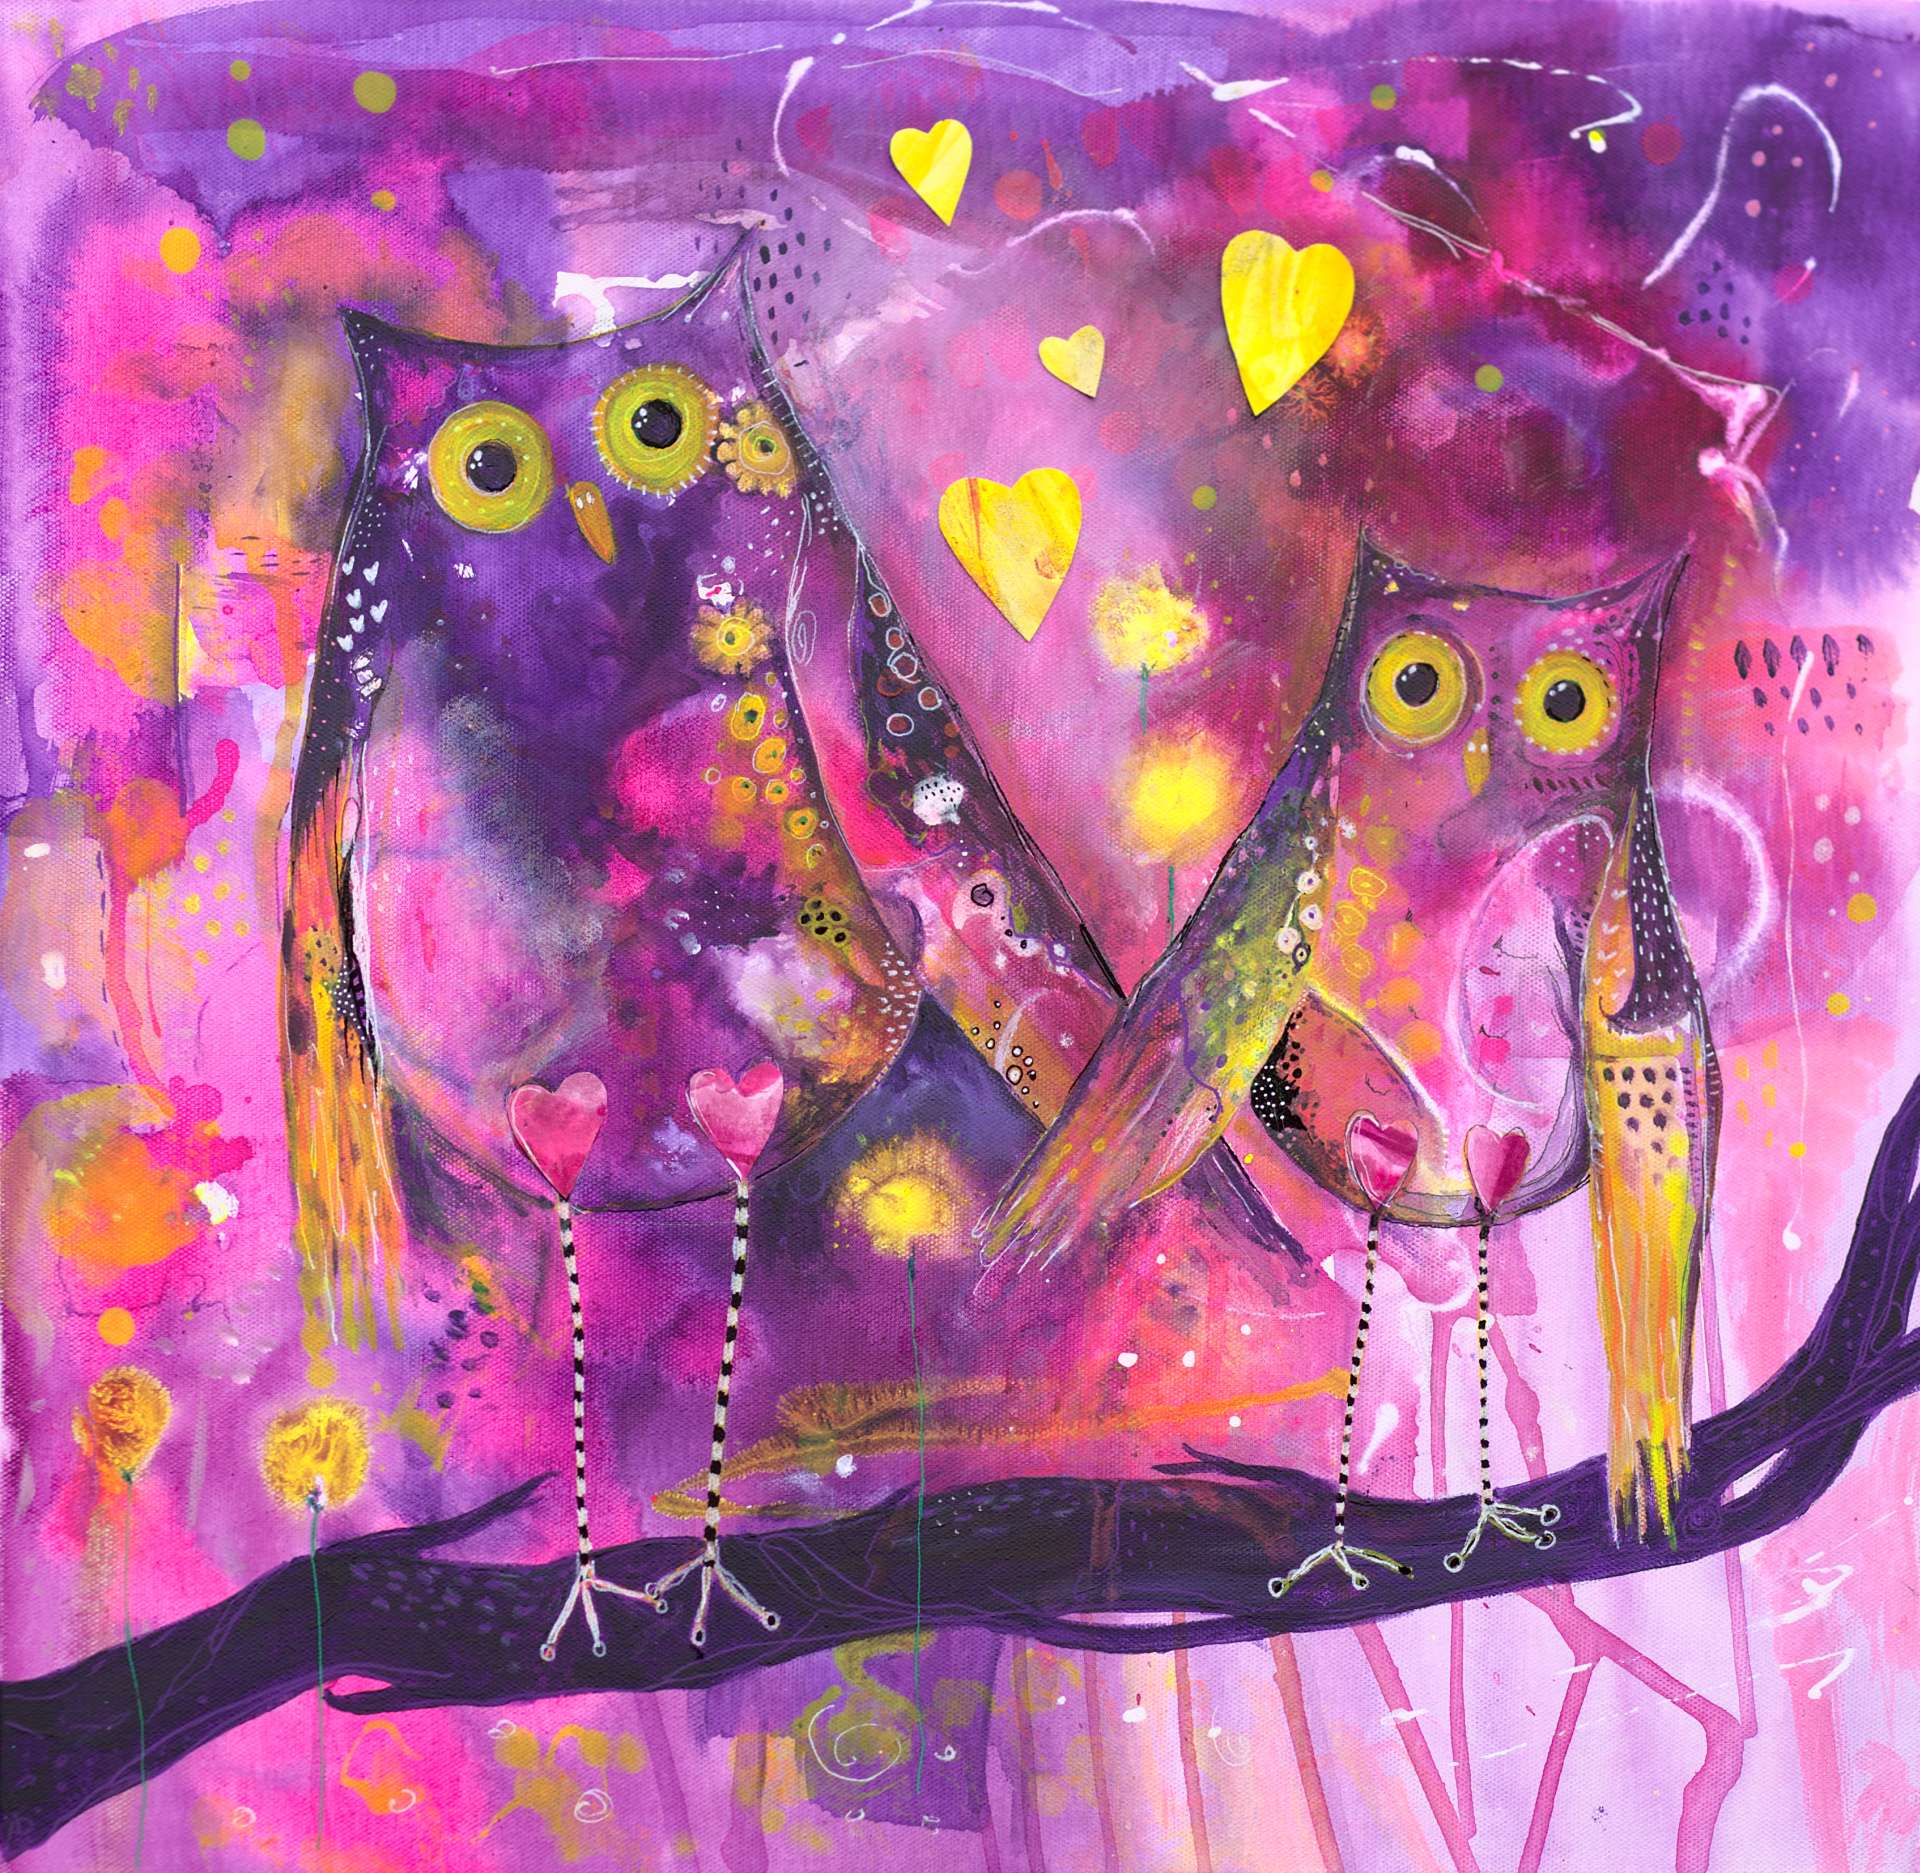 original owl painting - Stronger Together shows two owls holding wings painted in tones of pink and purple inks and acrylic paints. Yellow abstract dandelions and hearts surround them as they stand on a dark purple branch.